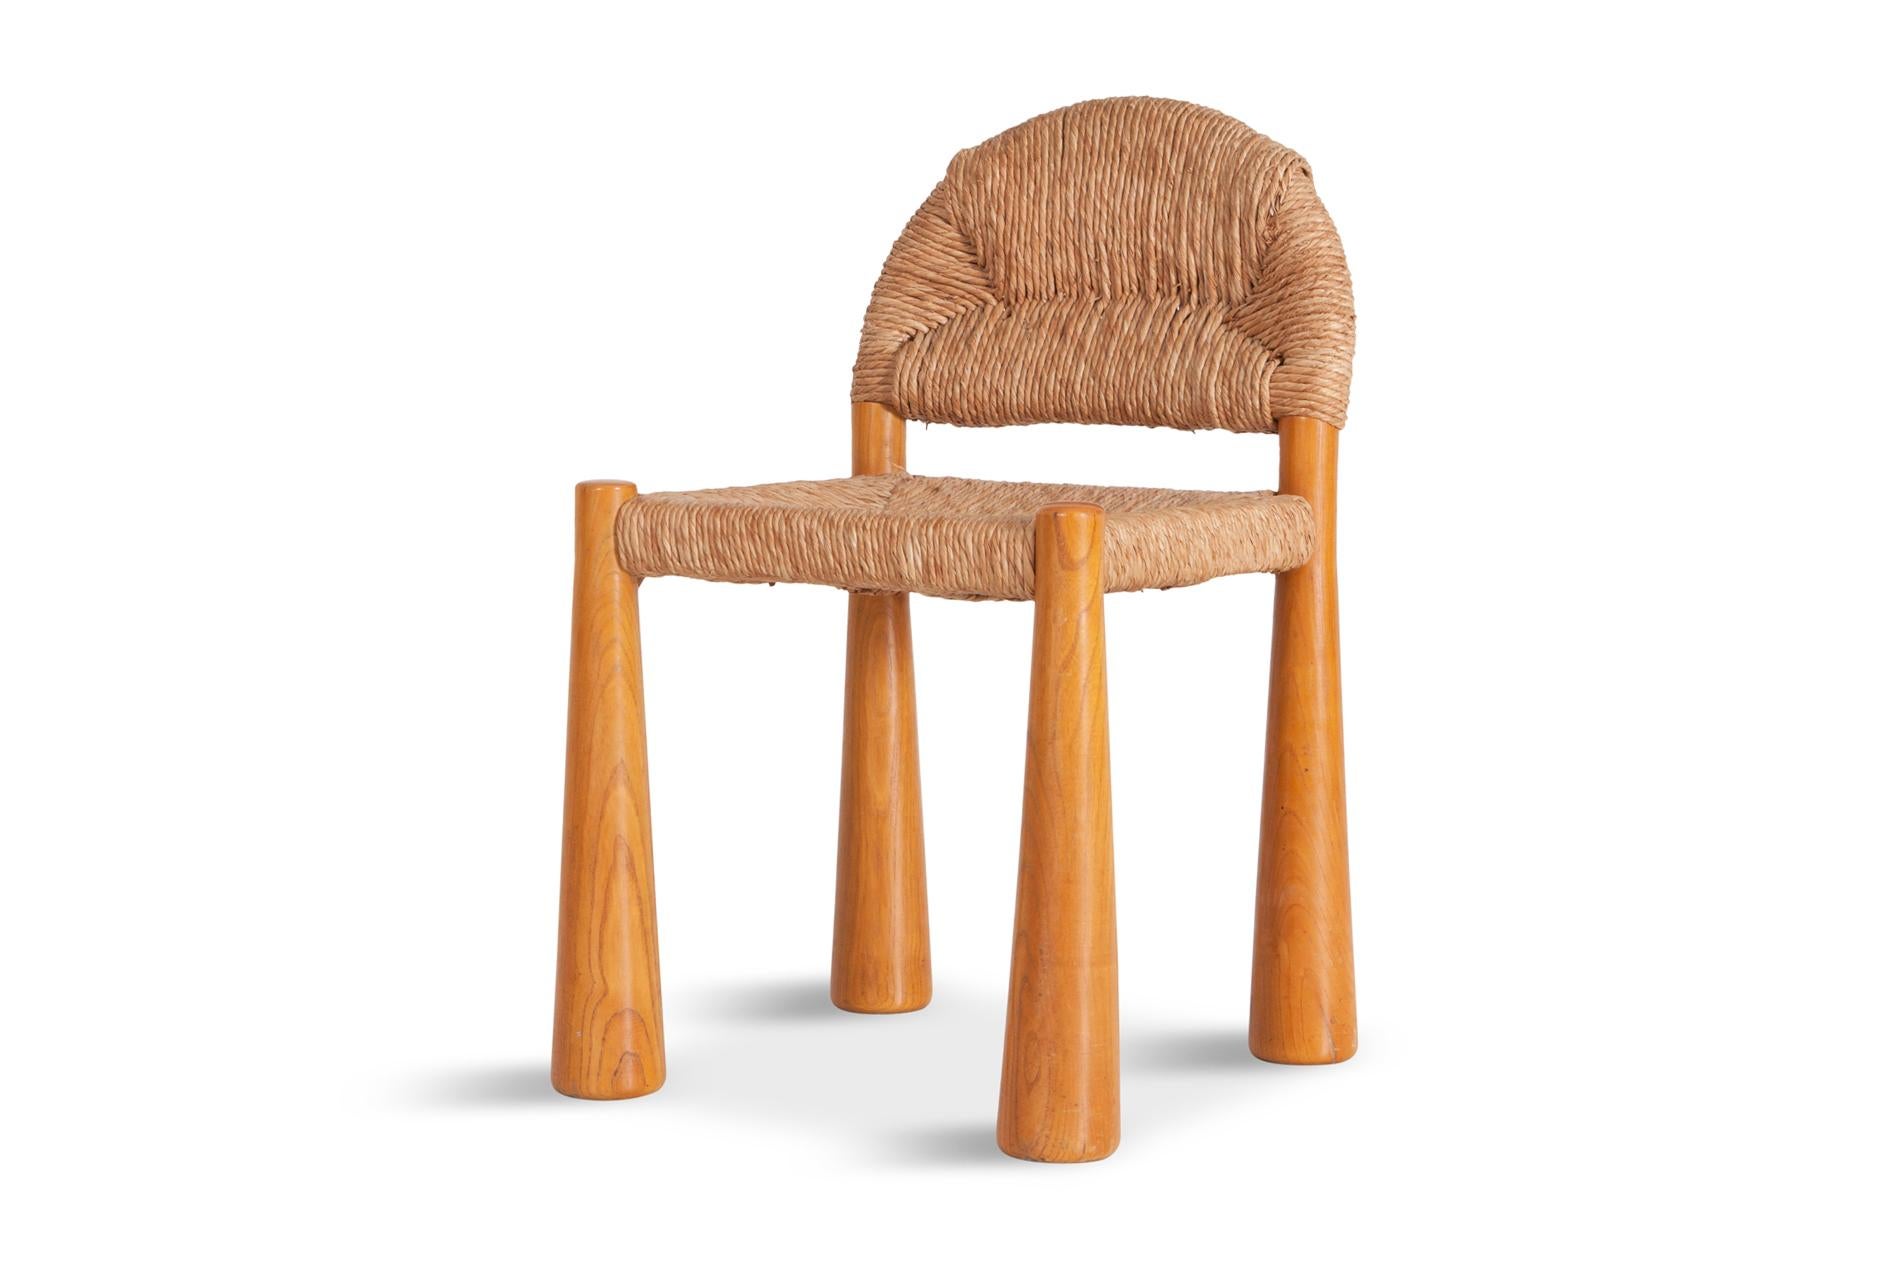 Wicker and Solid Pine Toscanolla Chairs by Alessandro Becchi for Giovanetti 1970 2